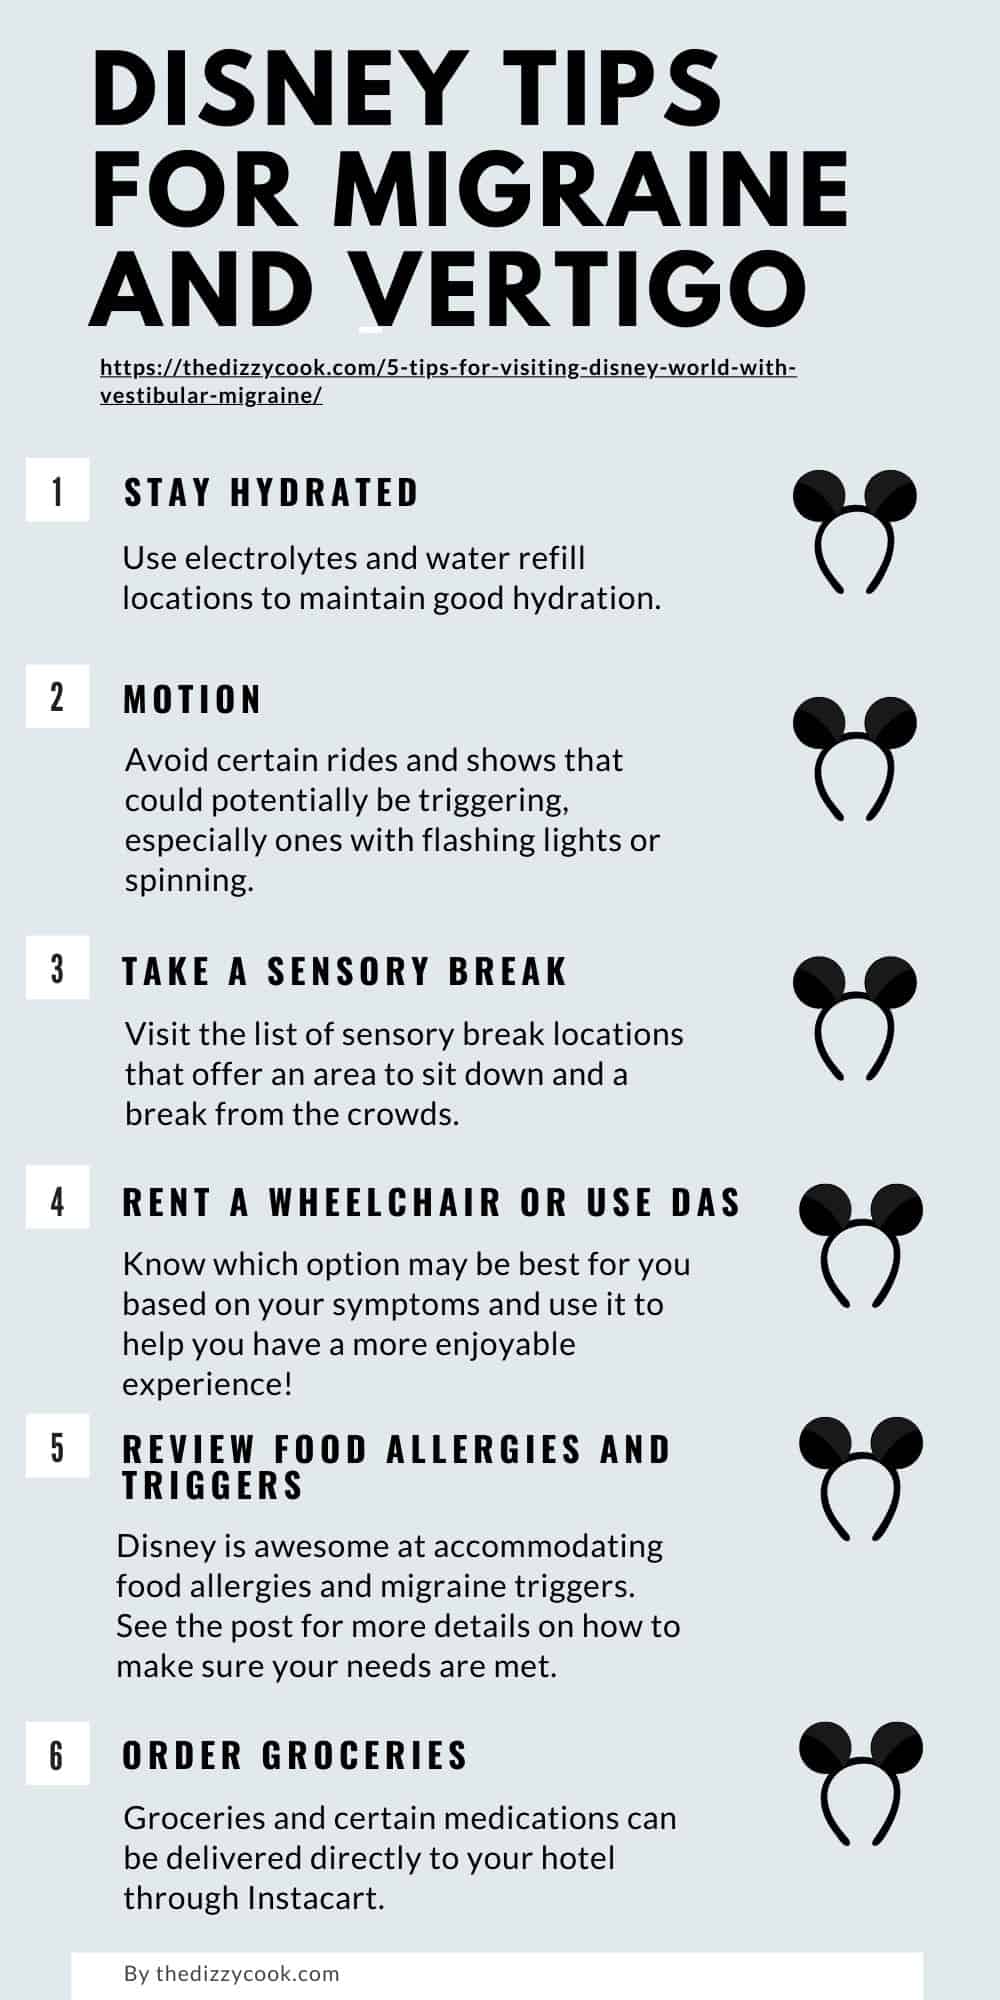 A list of tips for visiting Disney with a migraine attack.